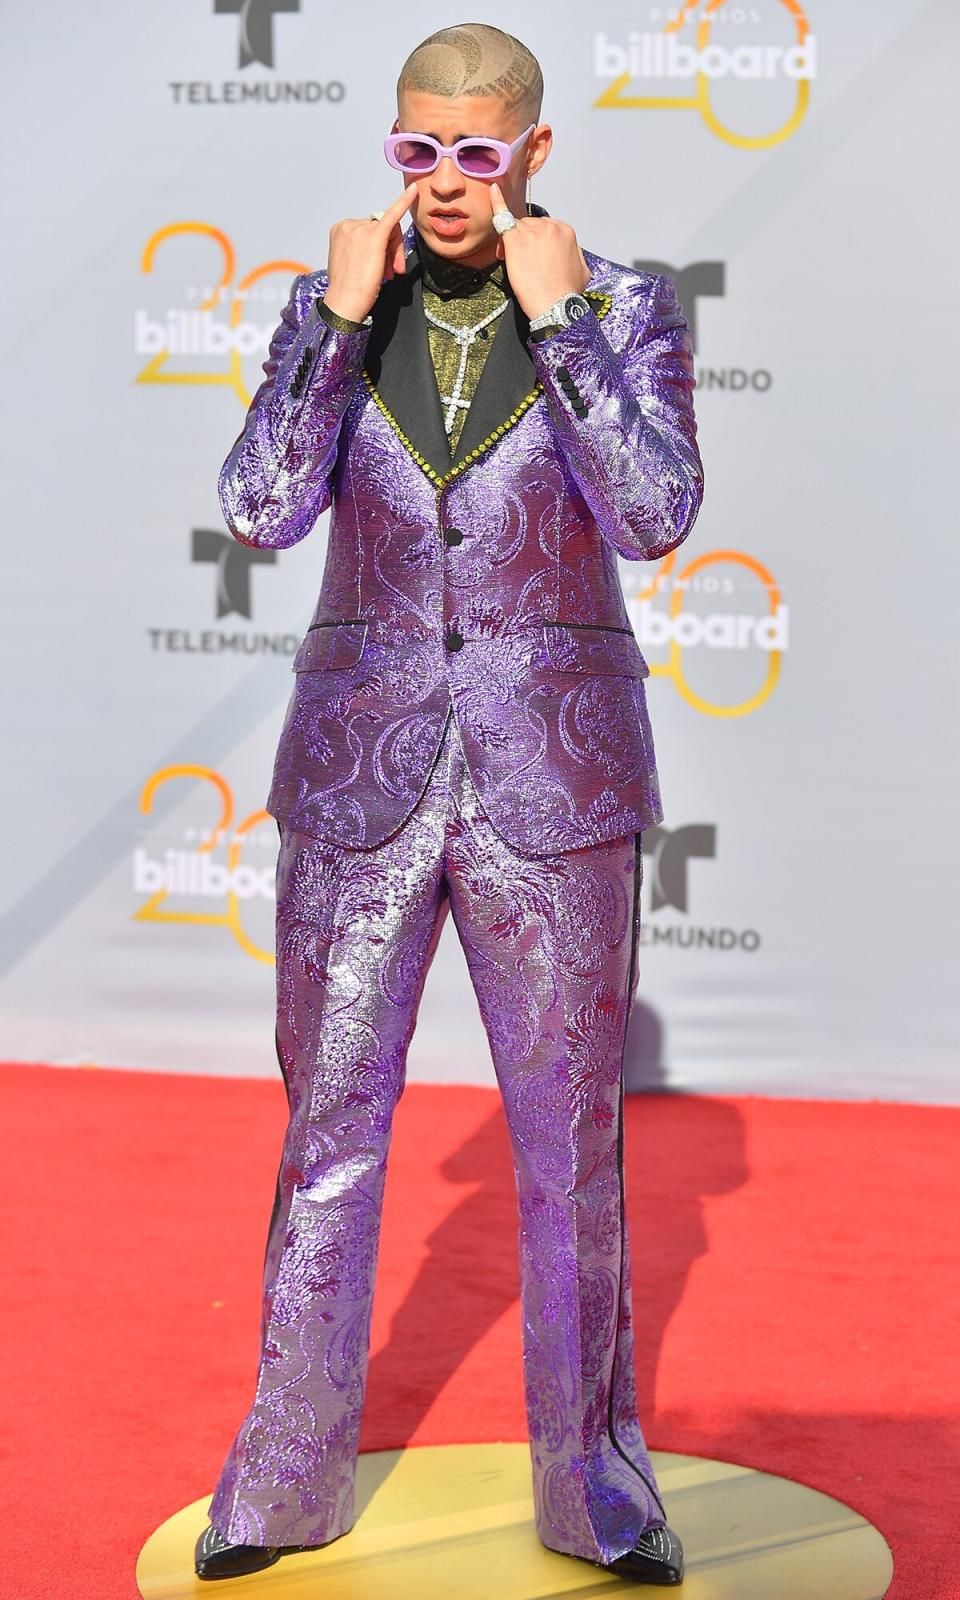 Bad Bunny attends the 2018 Billboard Latin Music Awards at the Mandalay Bay Events Center on April 26, 2018 in Las Vegas, Nevada